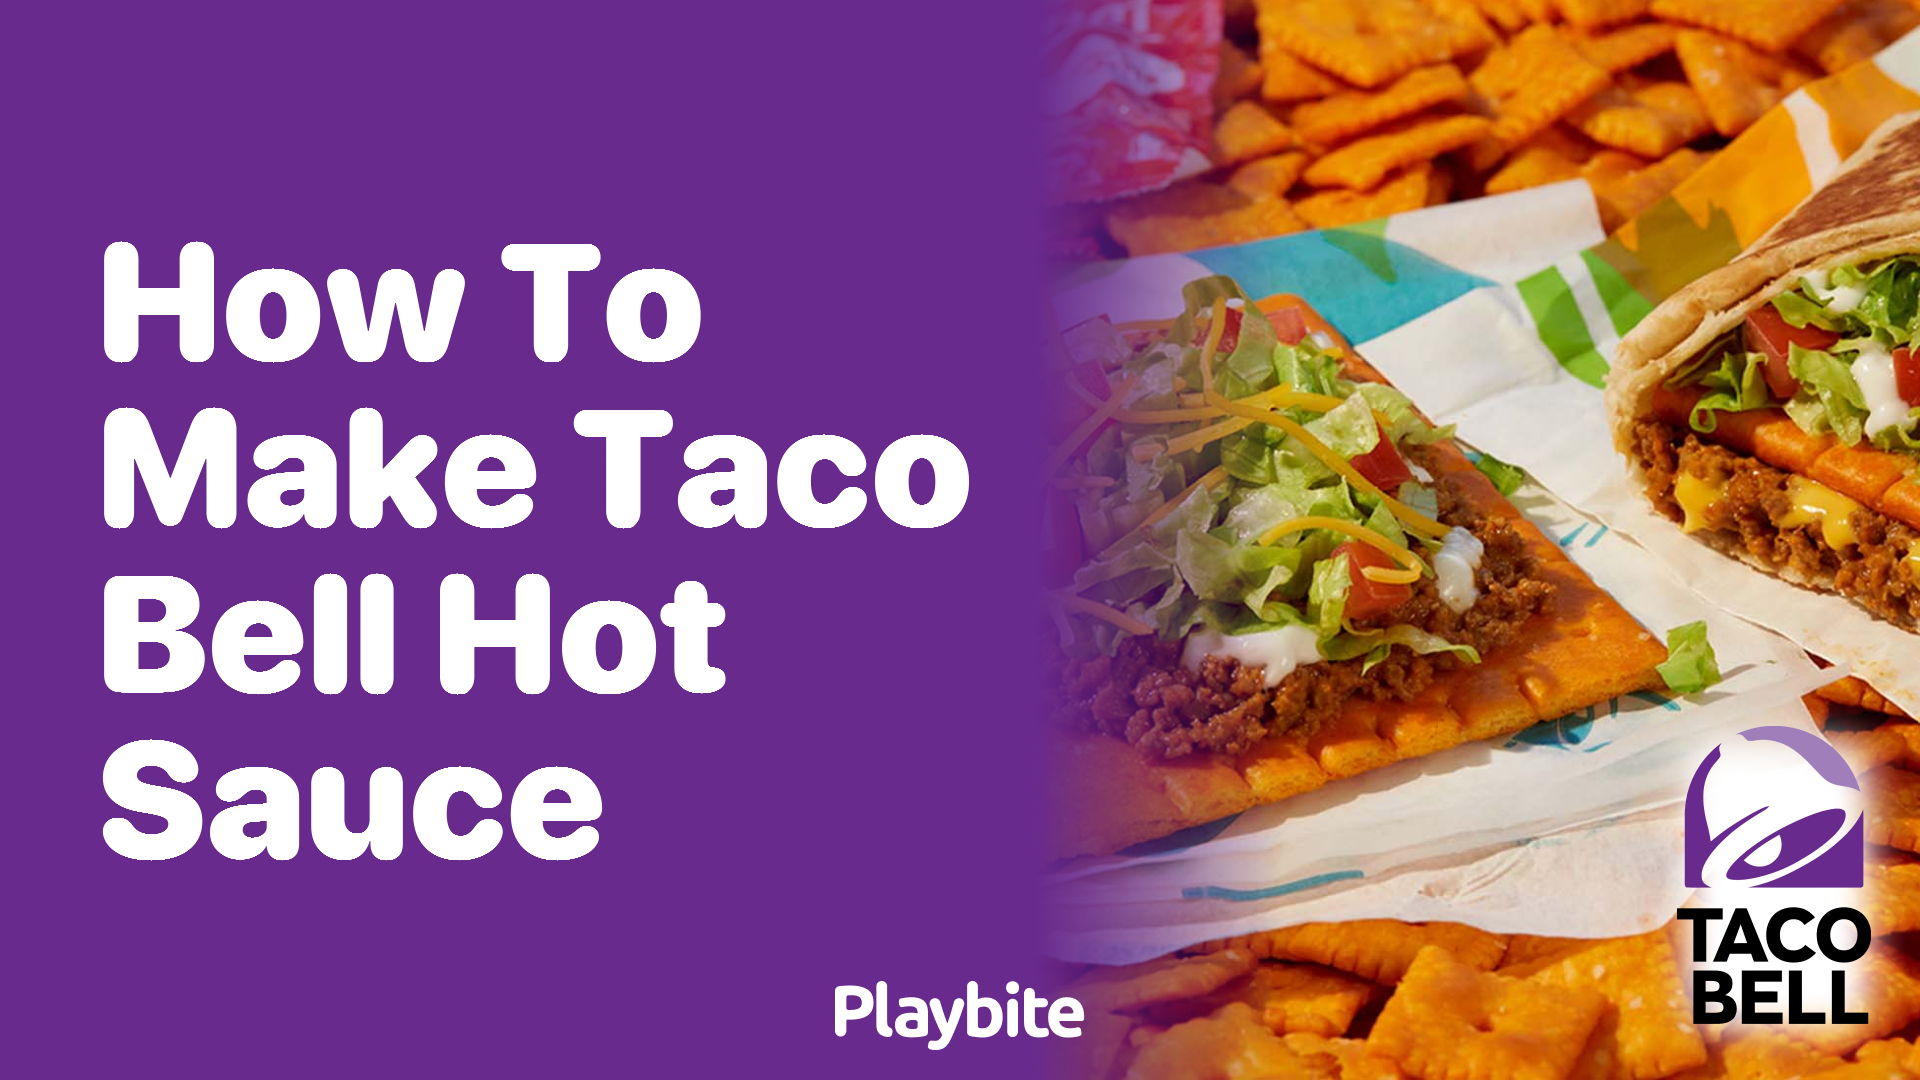 How to Make Taco Bell Hot Sauce at Home